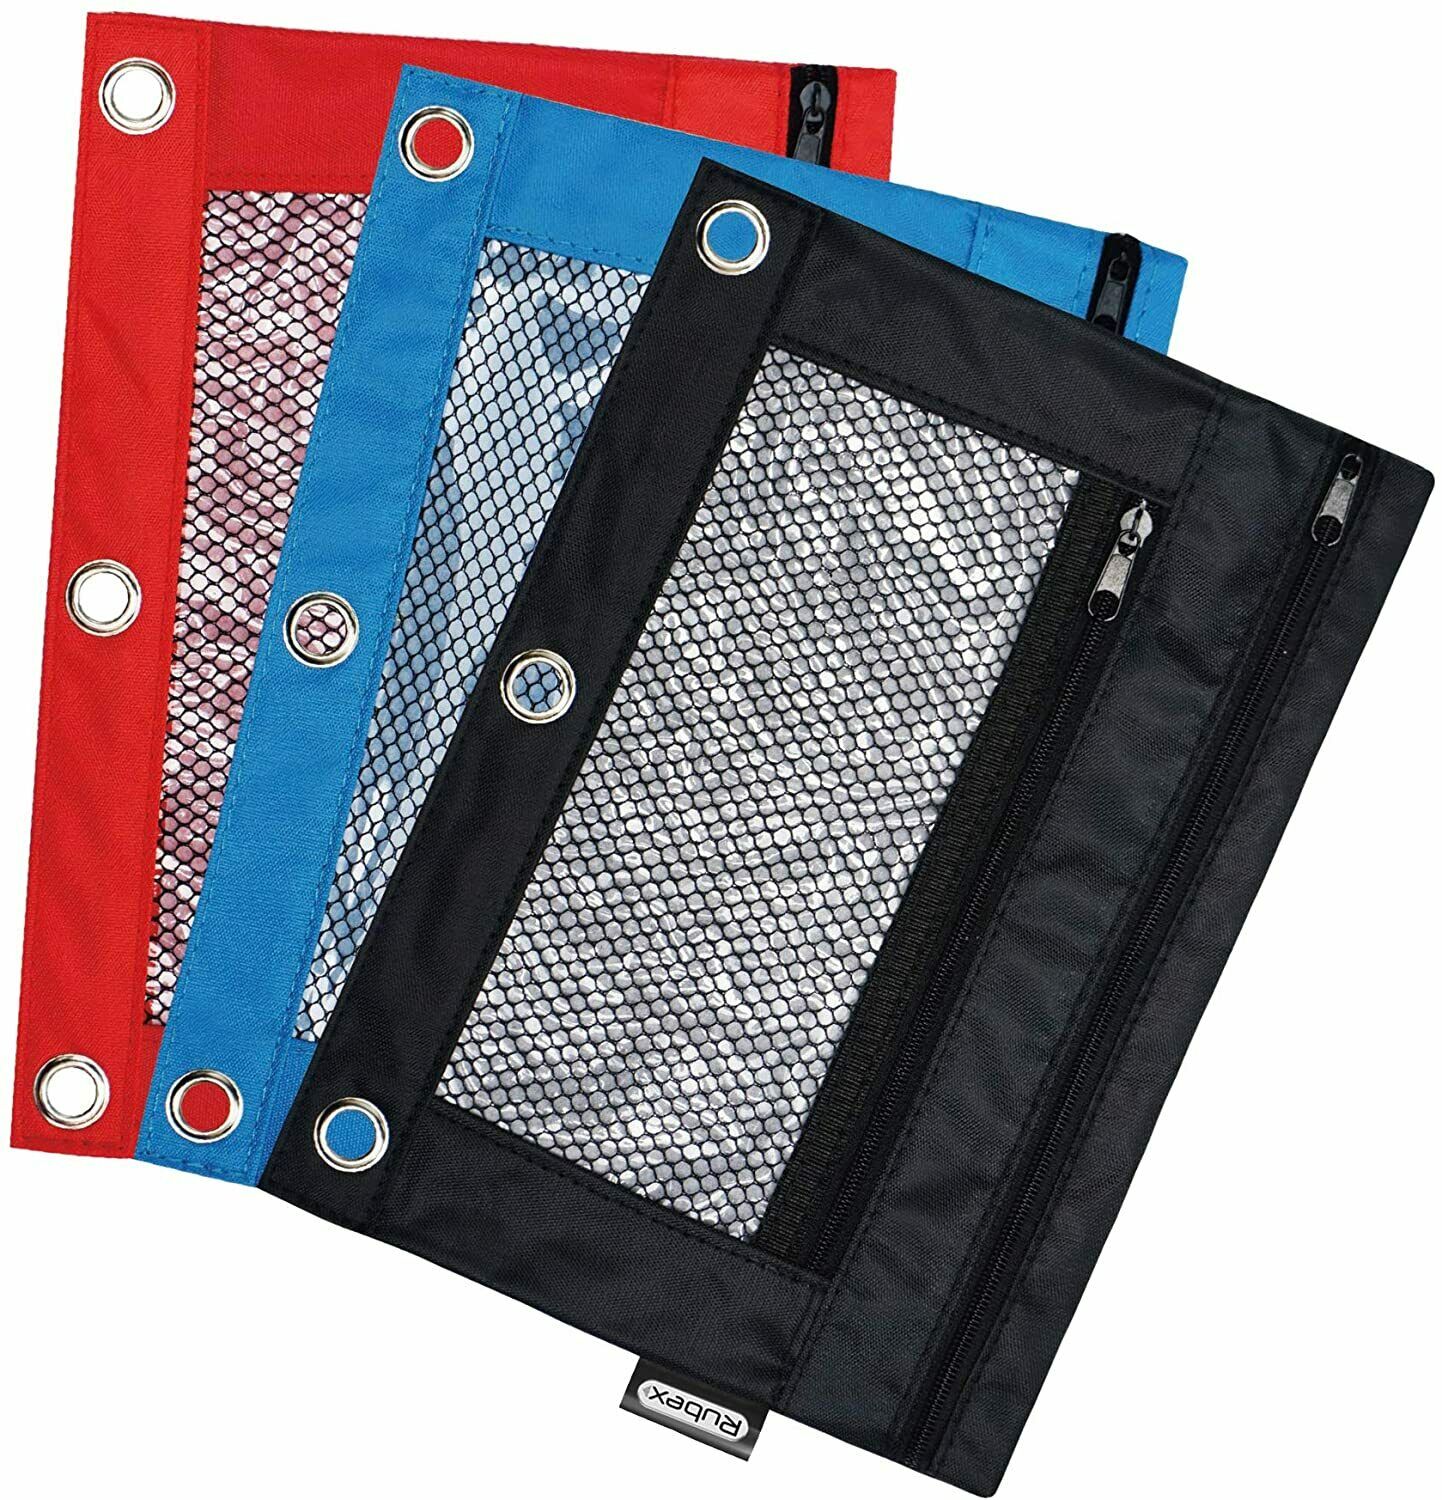 Assorted Color, 3-Ring Zipper Pencil Pouch with Mesh Window